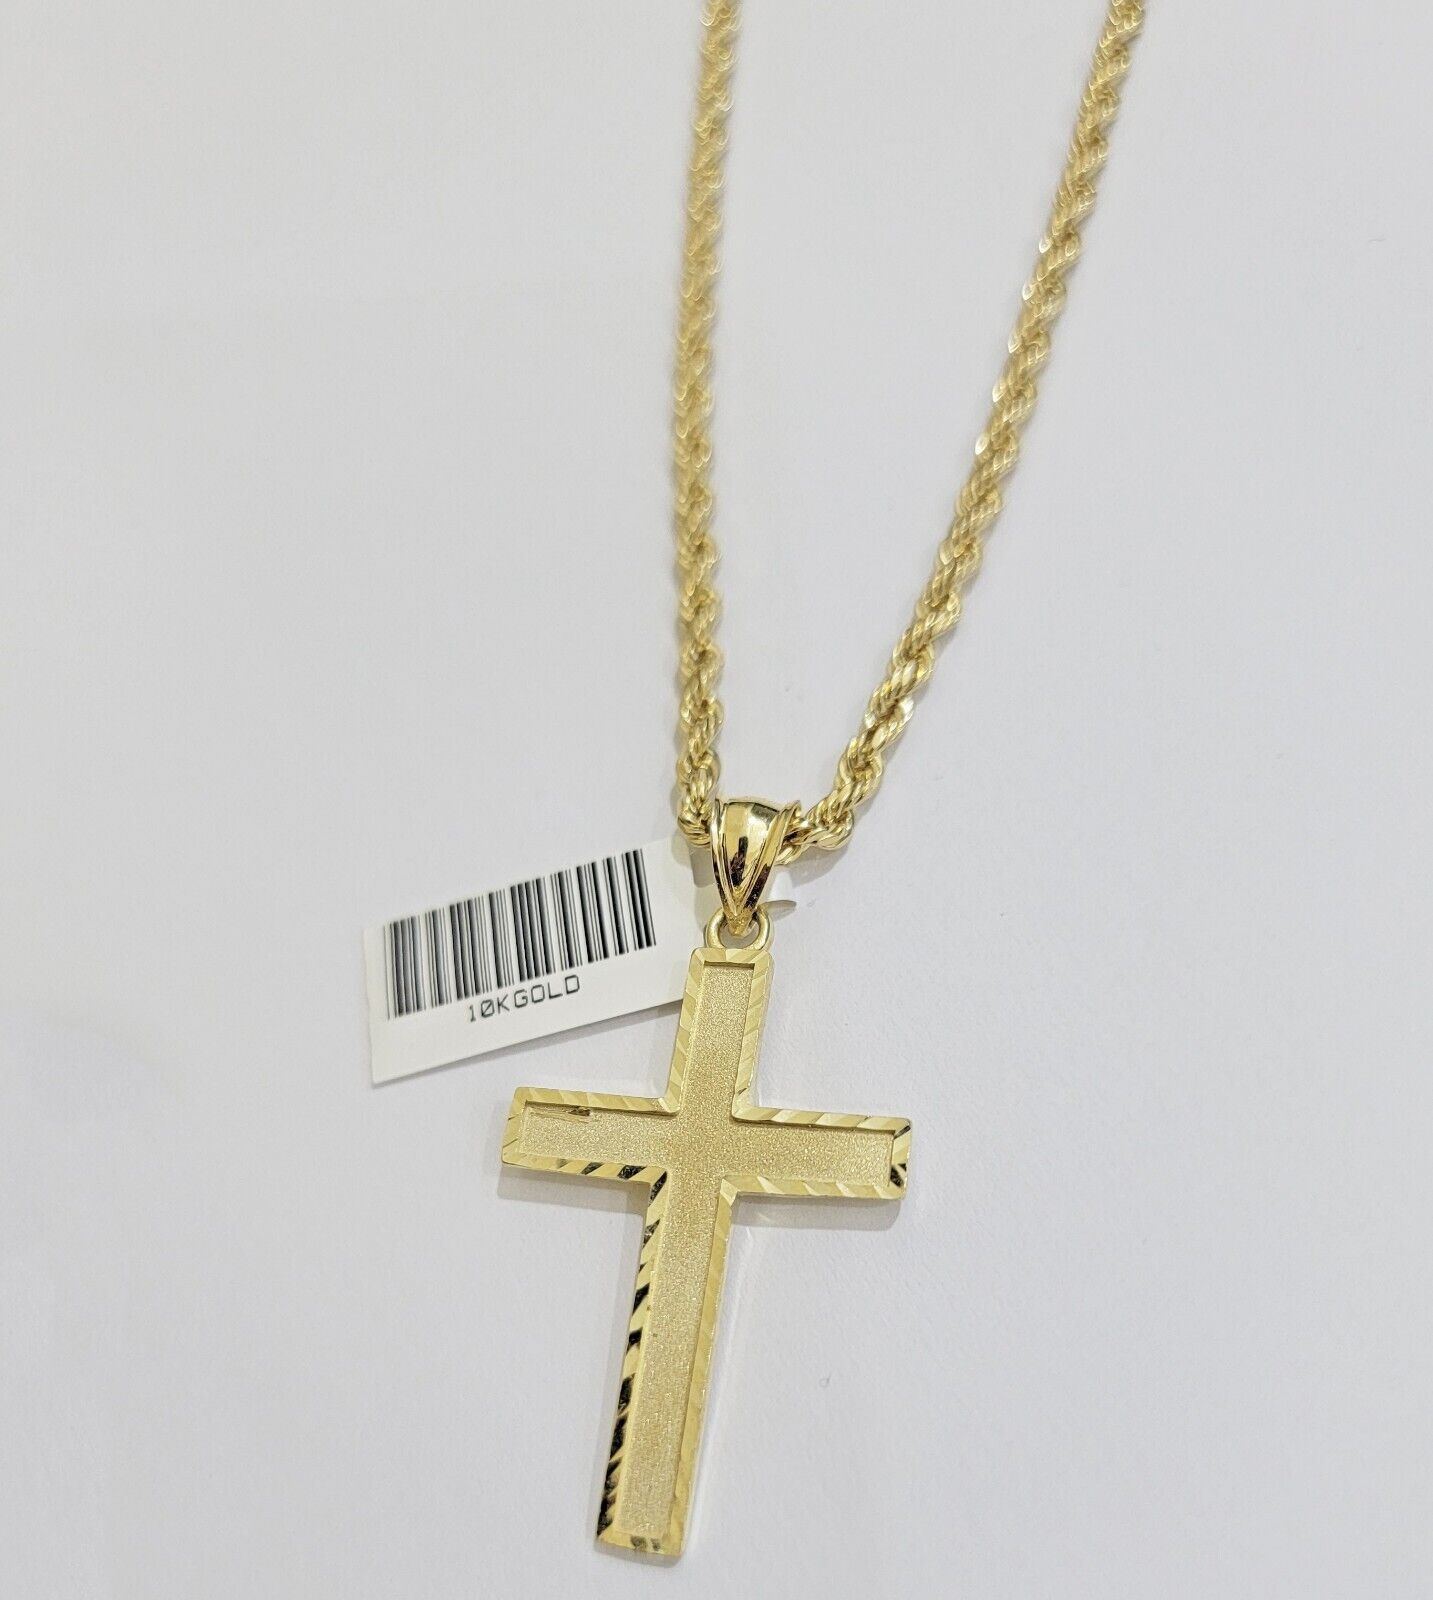 10k Yellow Gold Rope Chain & Cross Charm Set REAL 10KT 26 Inch necklace pendant